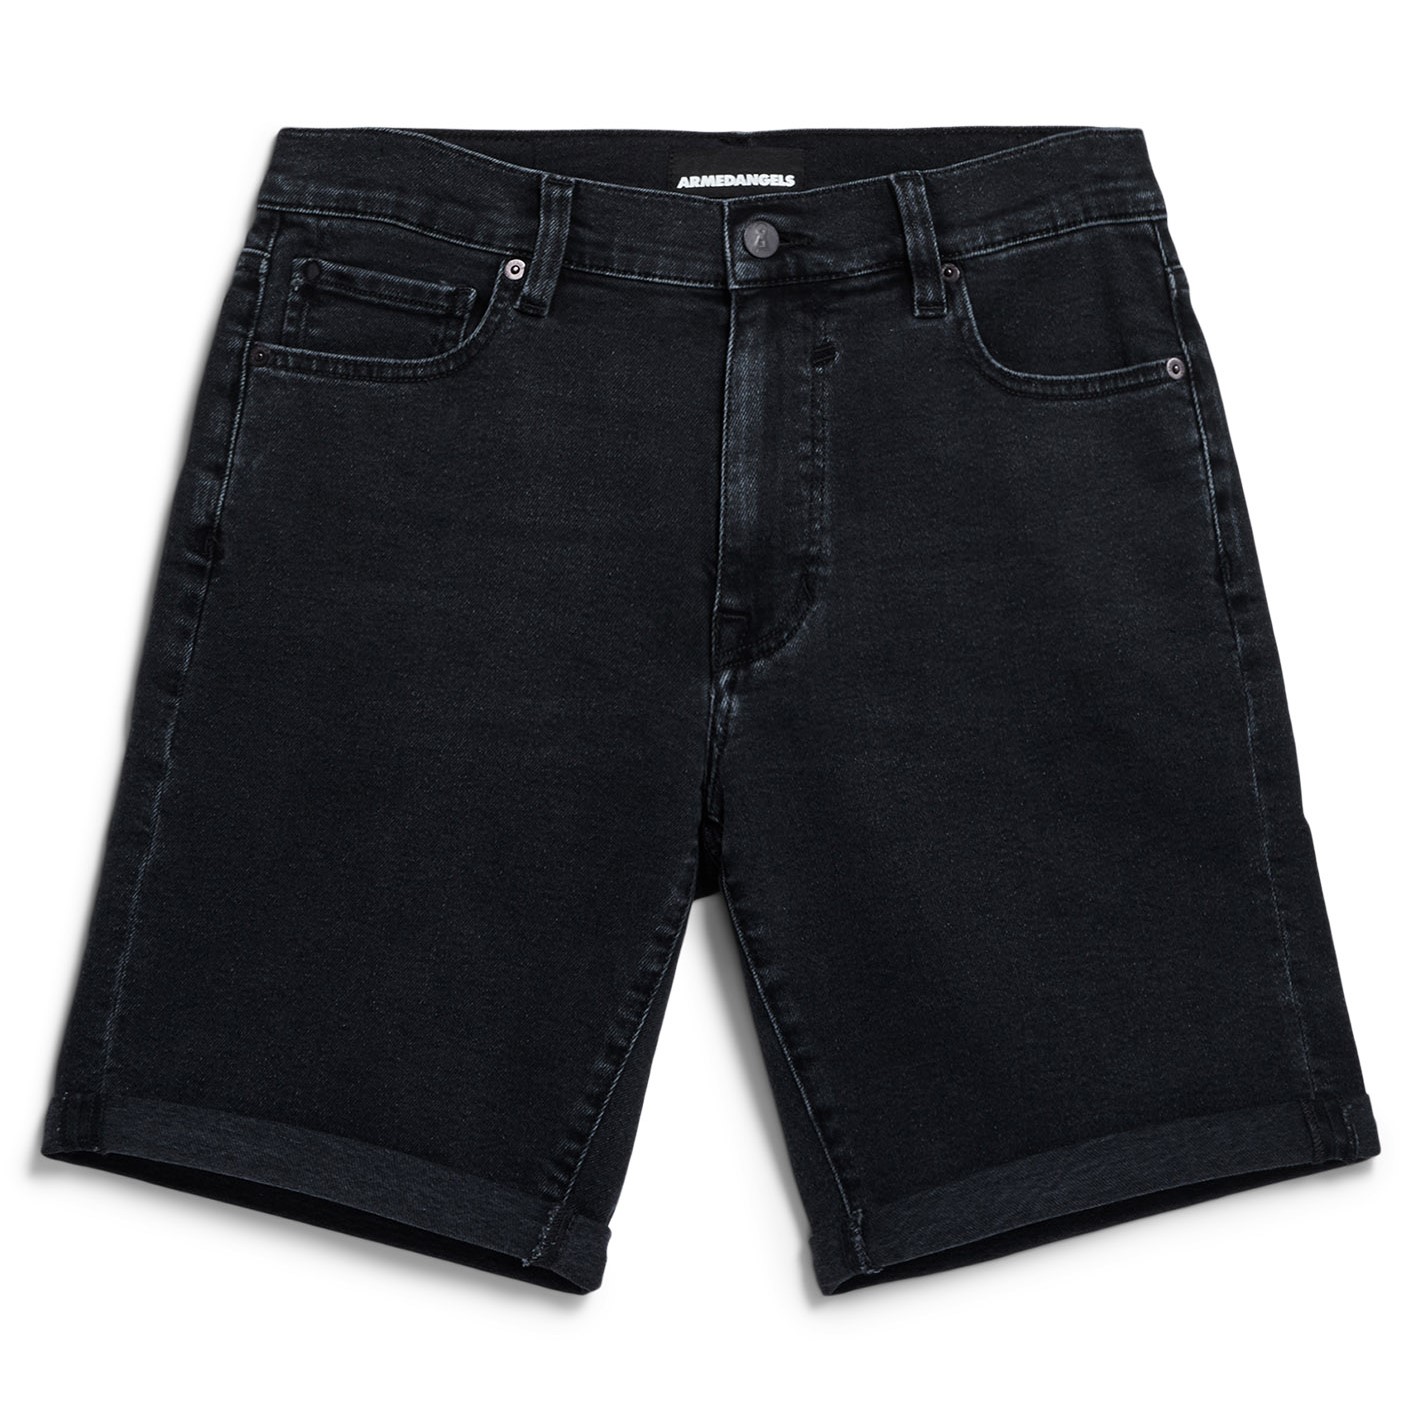 Jeans-Shorts NAAILO BLACK DNM black washed authentic